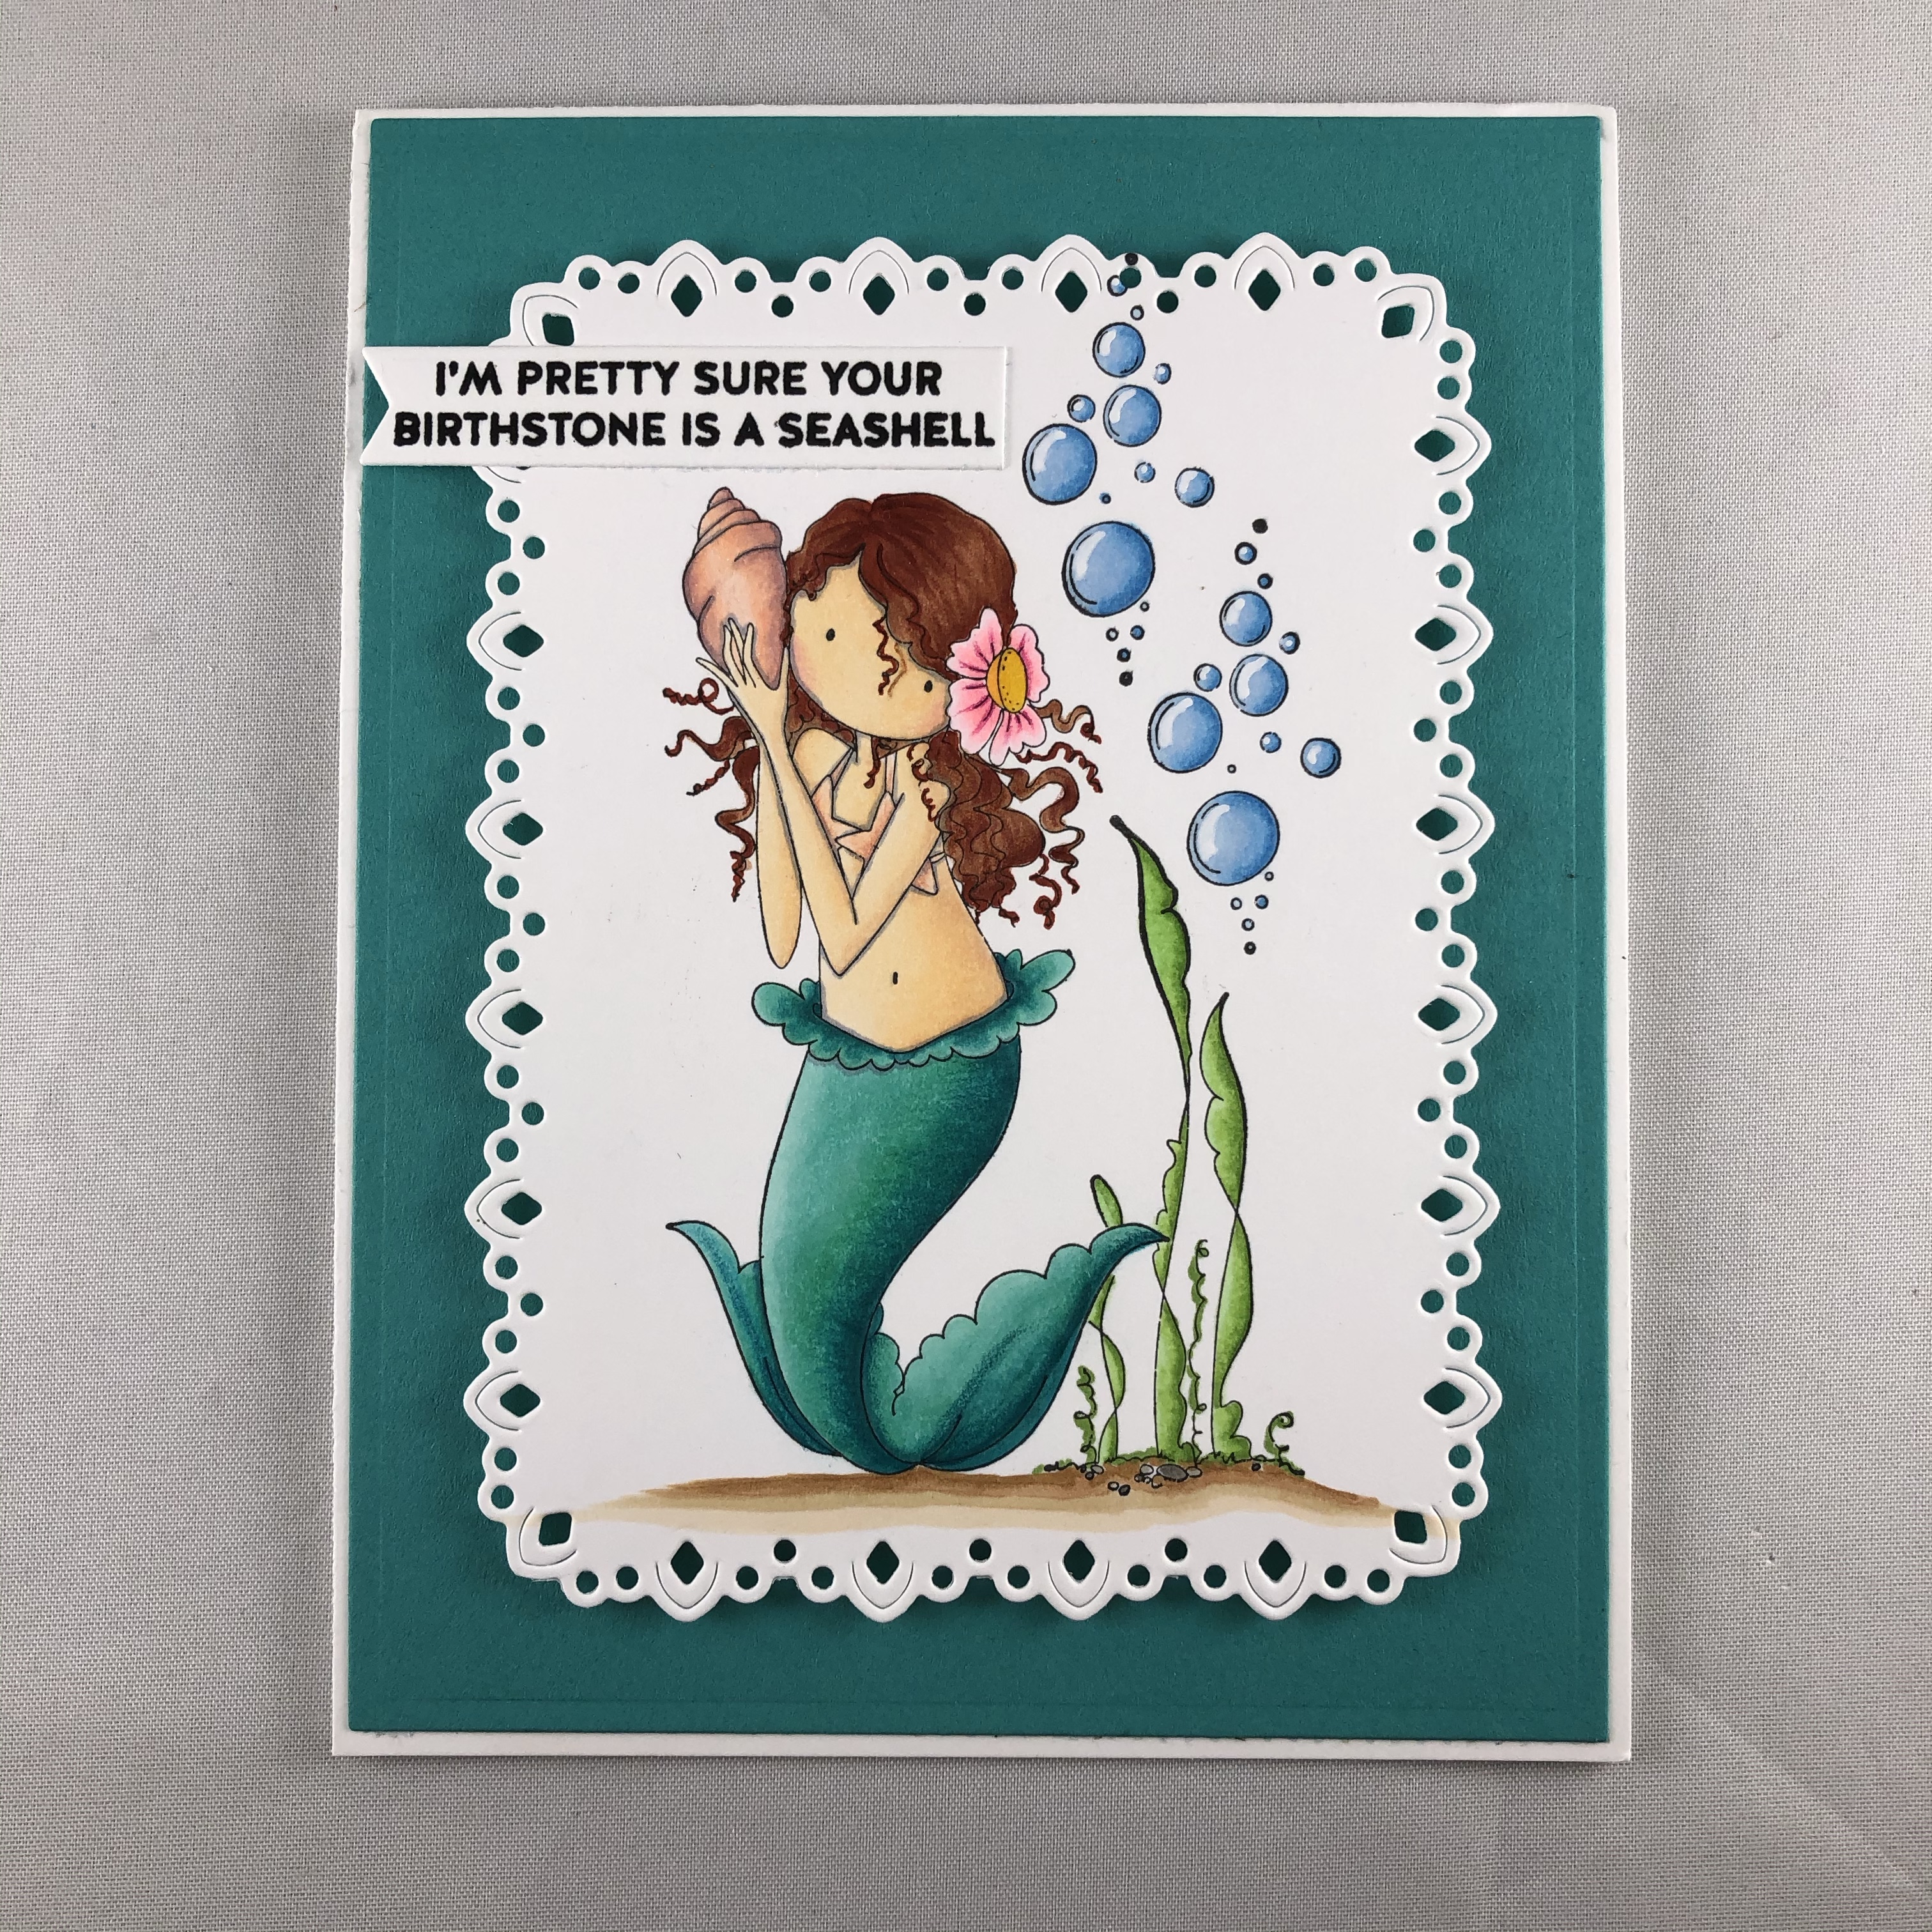 visit juststampin.com for inspiration and ideas